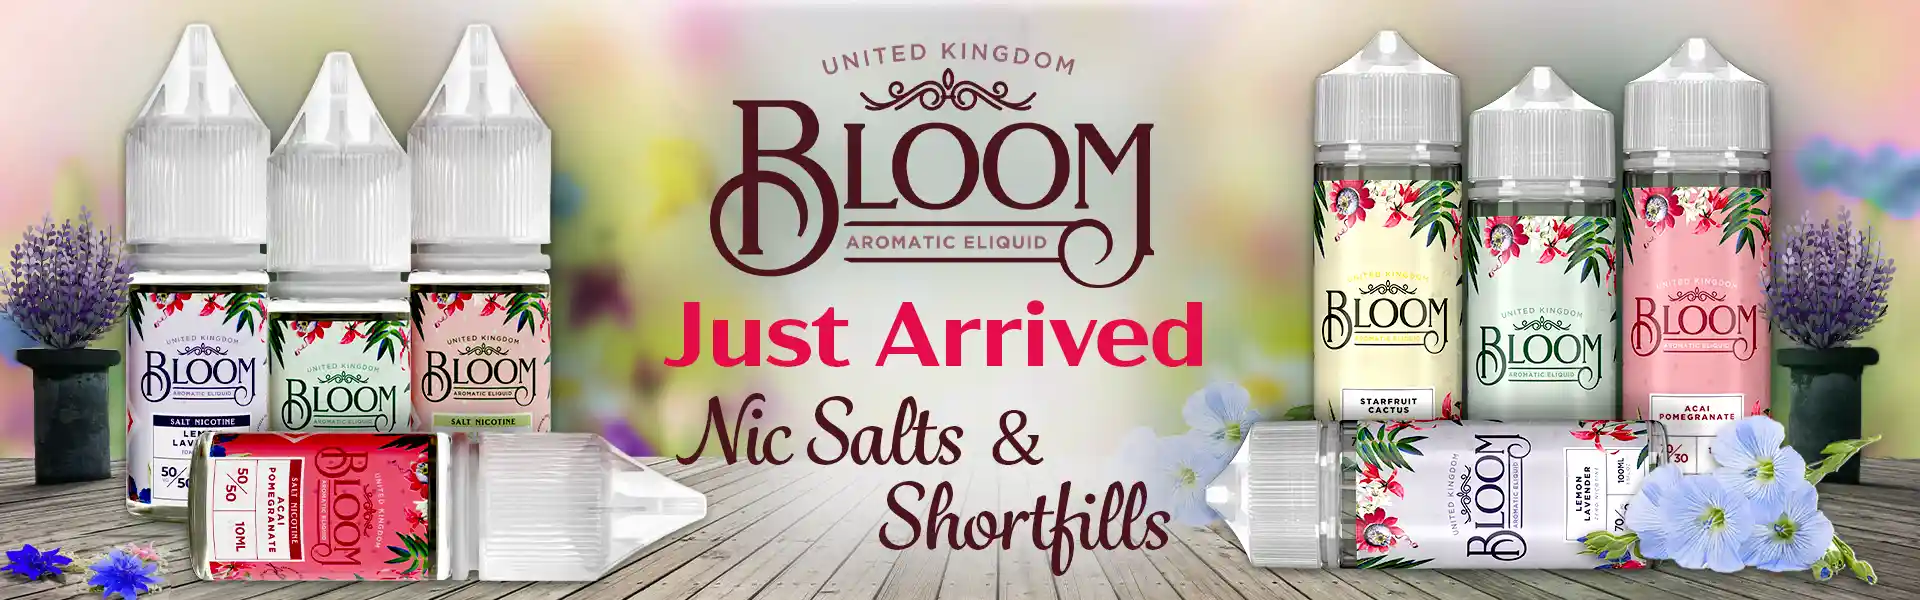 Bloom E-liquid and Nic Salts has just arrived